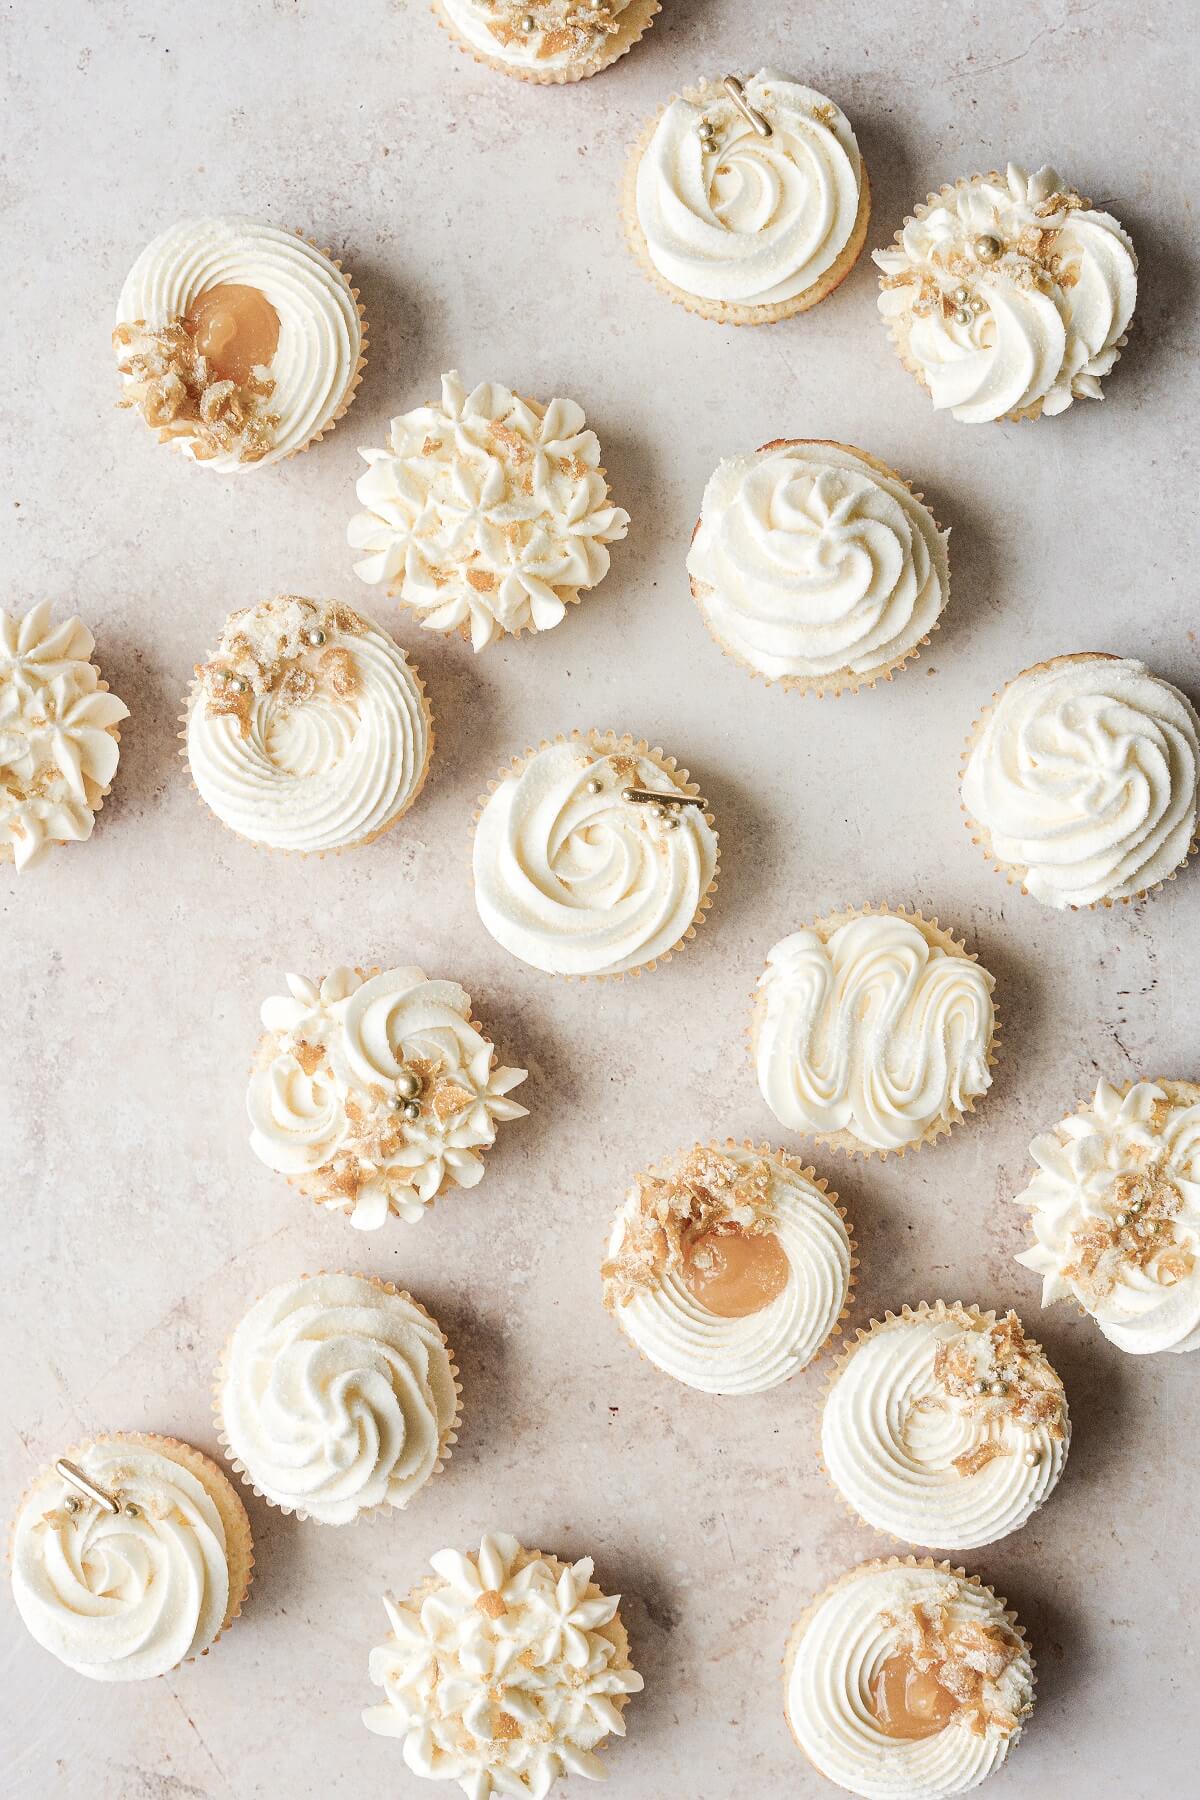 Lemon cupcakes decorated with buttercream, gold sugar pearls and candied lemon peel.